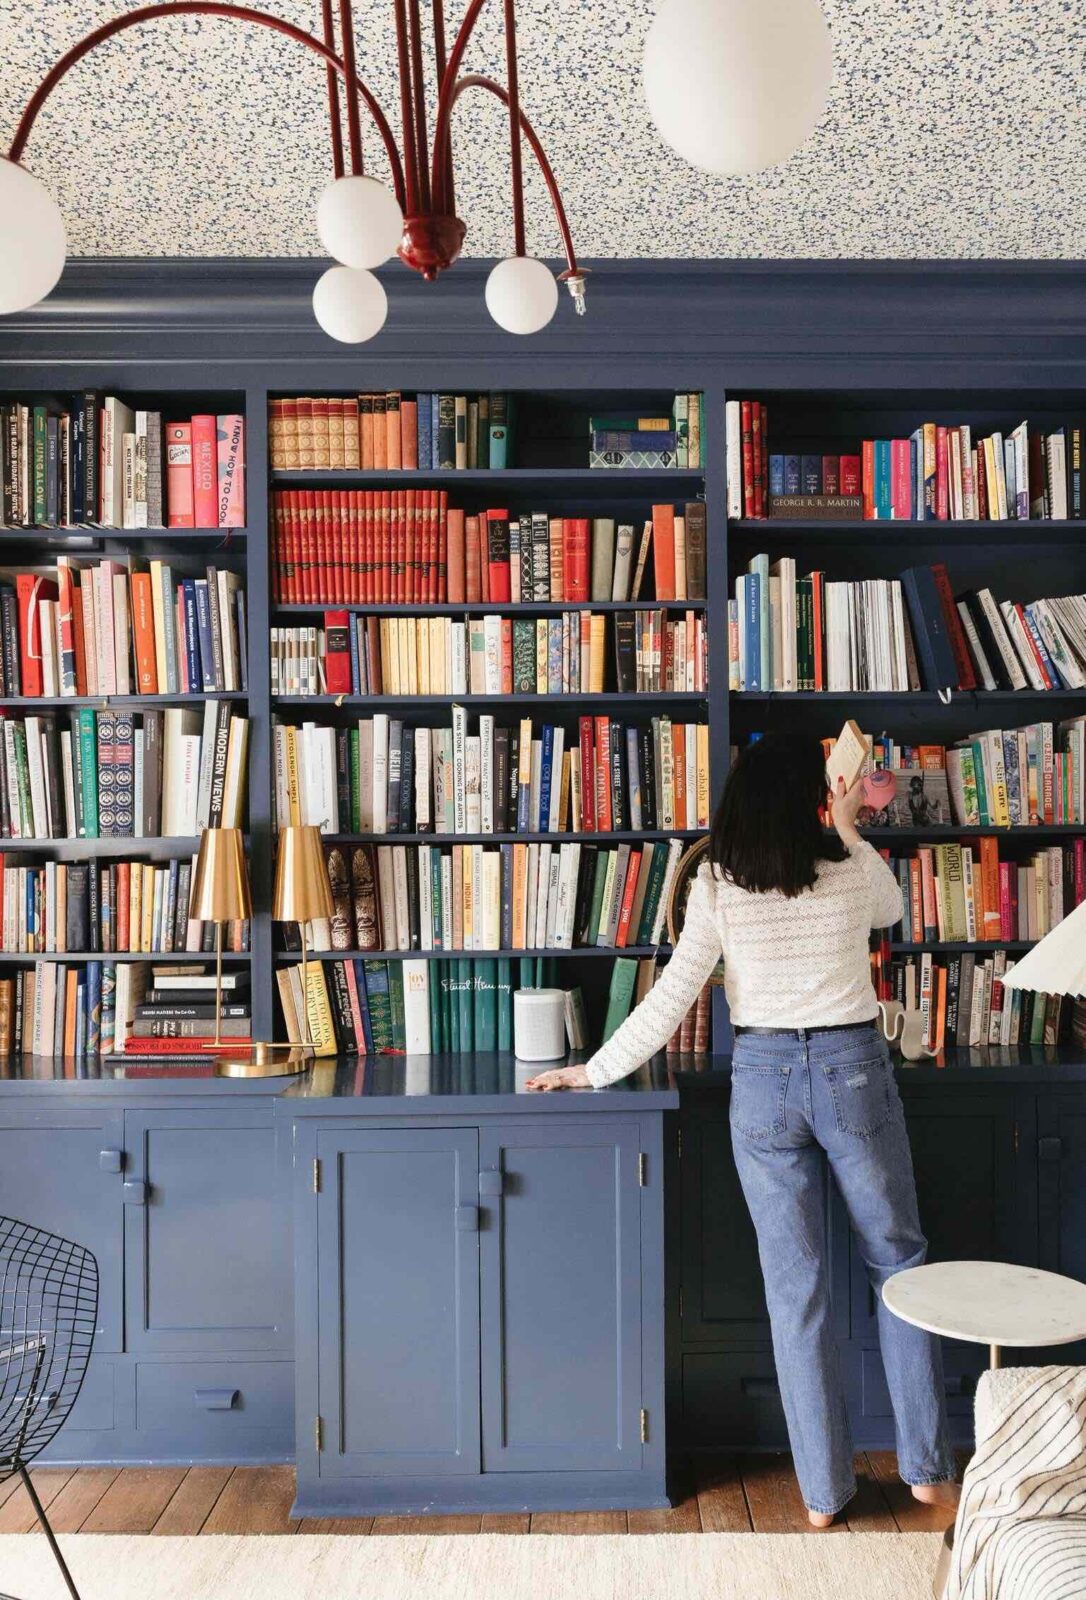 Woman is standing in front of a blue-painted built-in bookshelf, pulling a book off of a shelf.